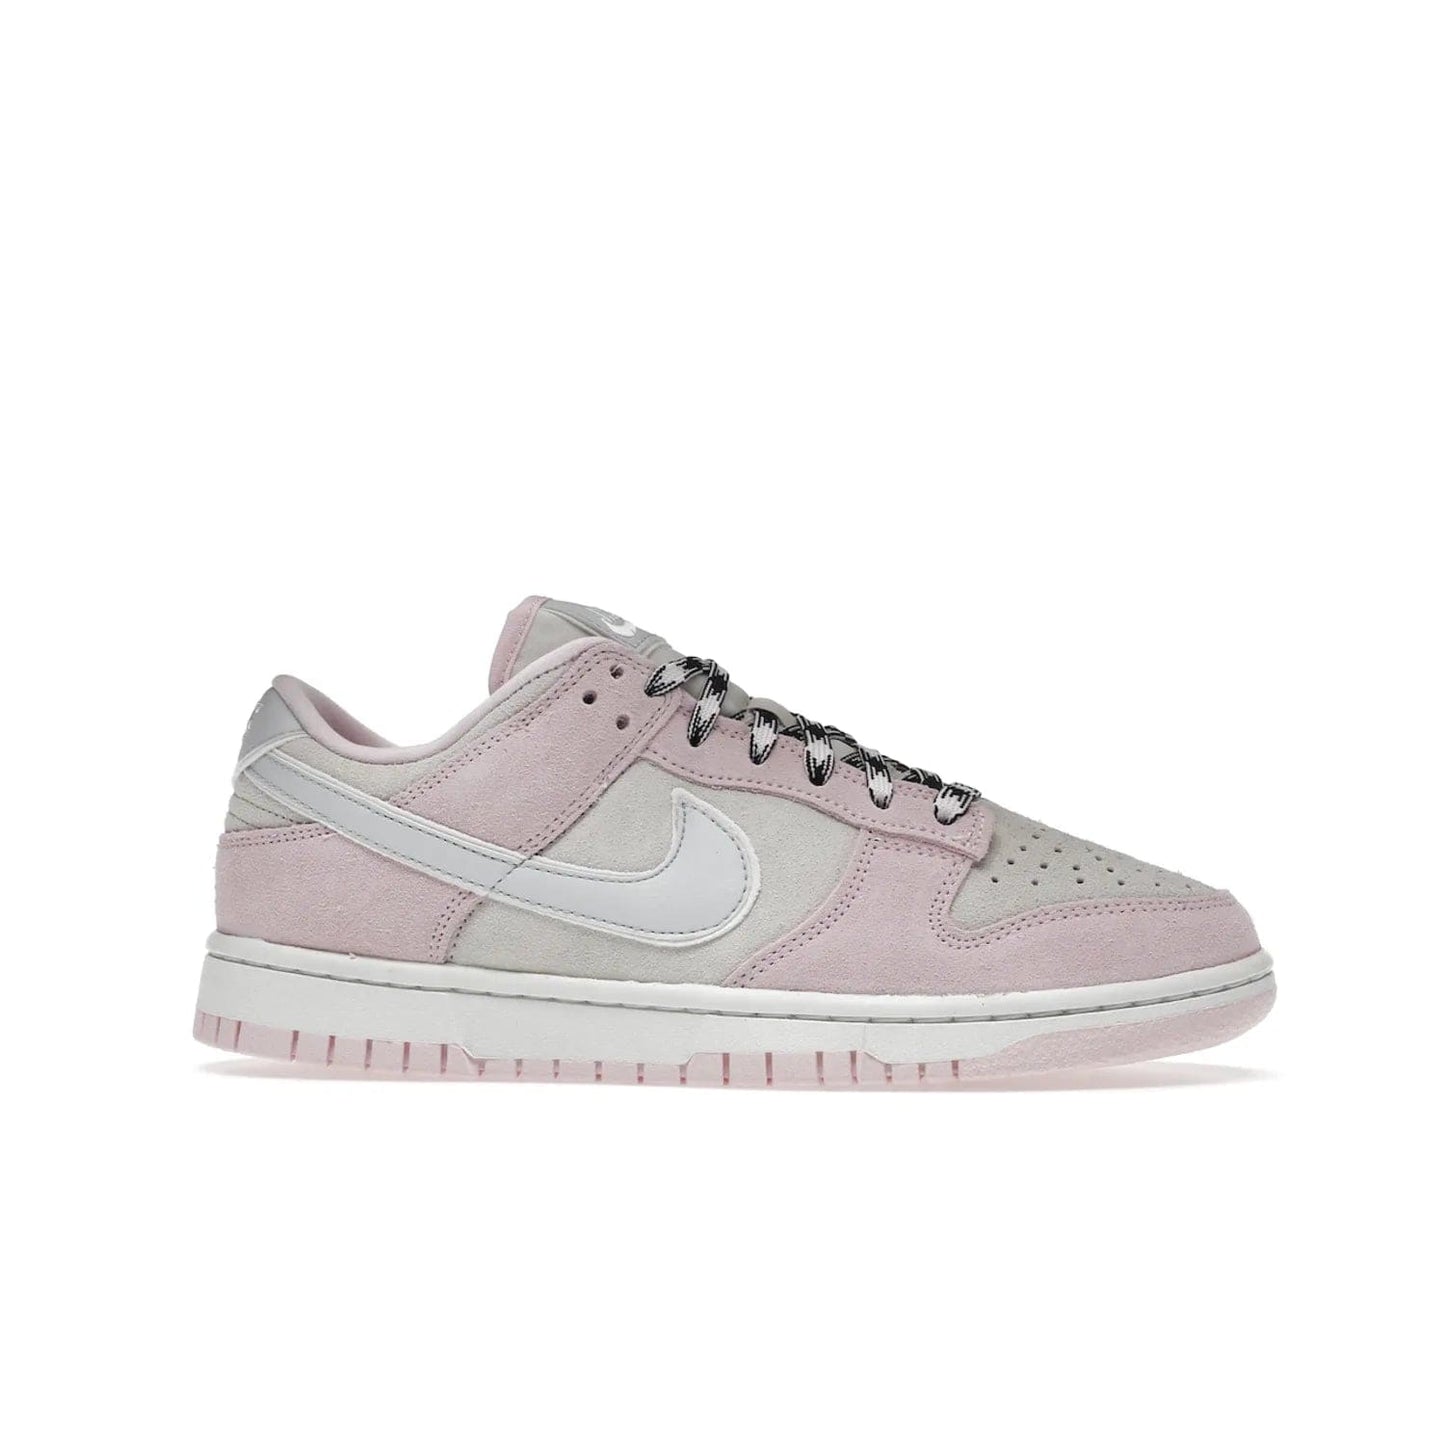 Nike Dunk Low LX Pink Foam (Women's) - Image 2 - Only at www.BallersClubKickz.com - Feminine & fashionable Nike Dunk Low LX Pink Foam W sneaker. Featuring leather and synthetic materials and durable rubber sole. Lace-up design ensures a snug fit. Released Dec. 10th 2022, $120. Stylish and comfortable.